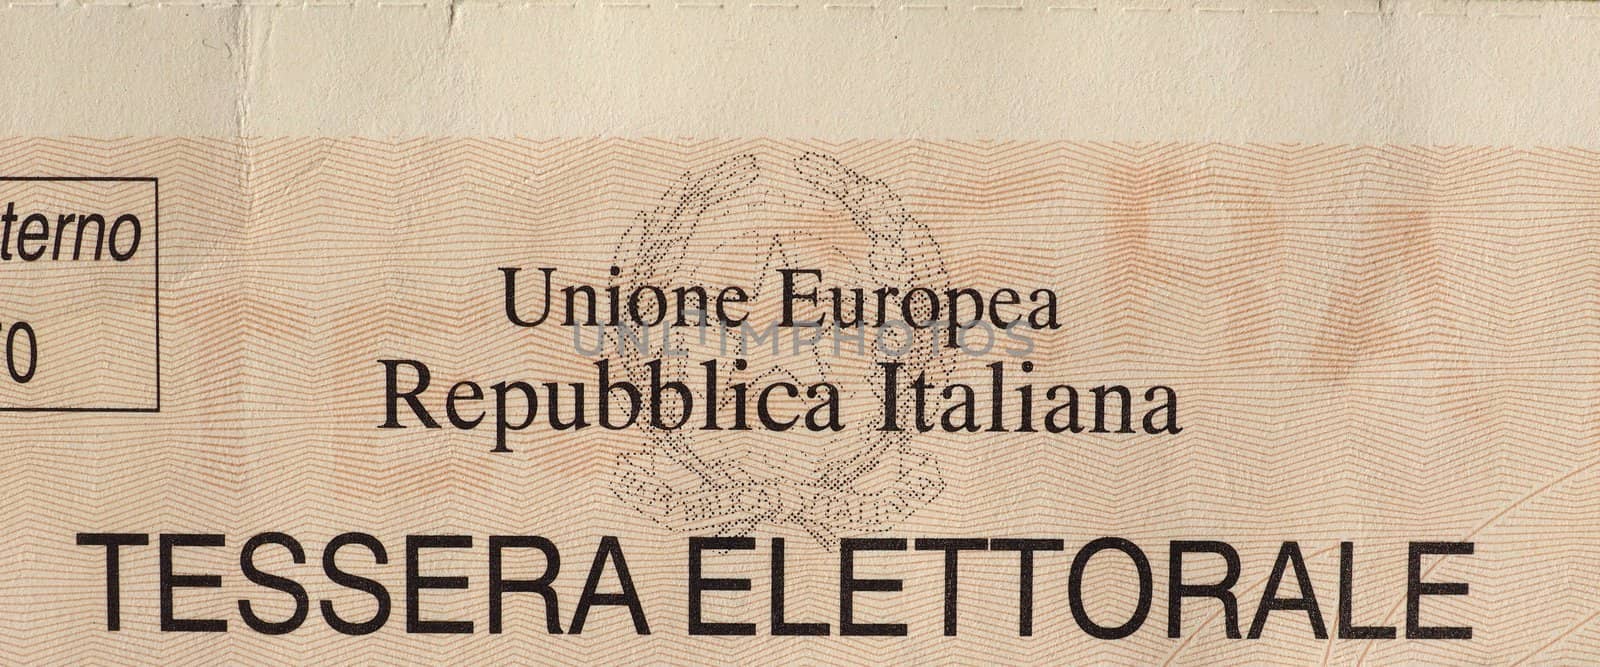 MILAN, ITALY - CIRCA FEBRUARY 2018: Italian electoral card for general elections and local elections